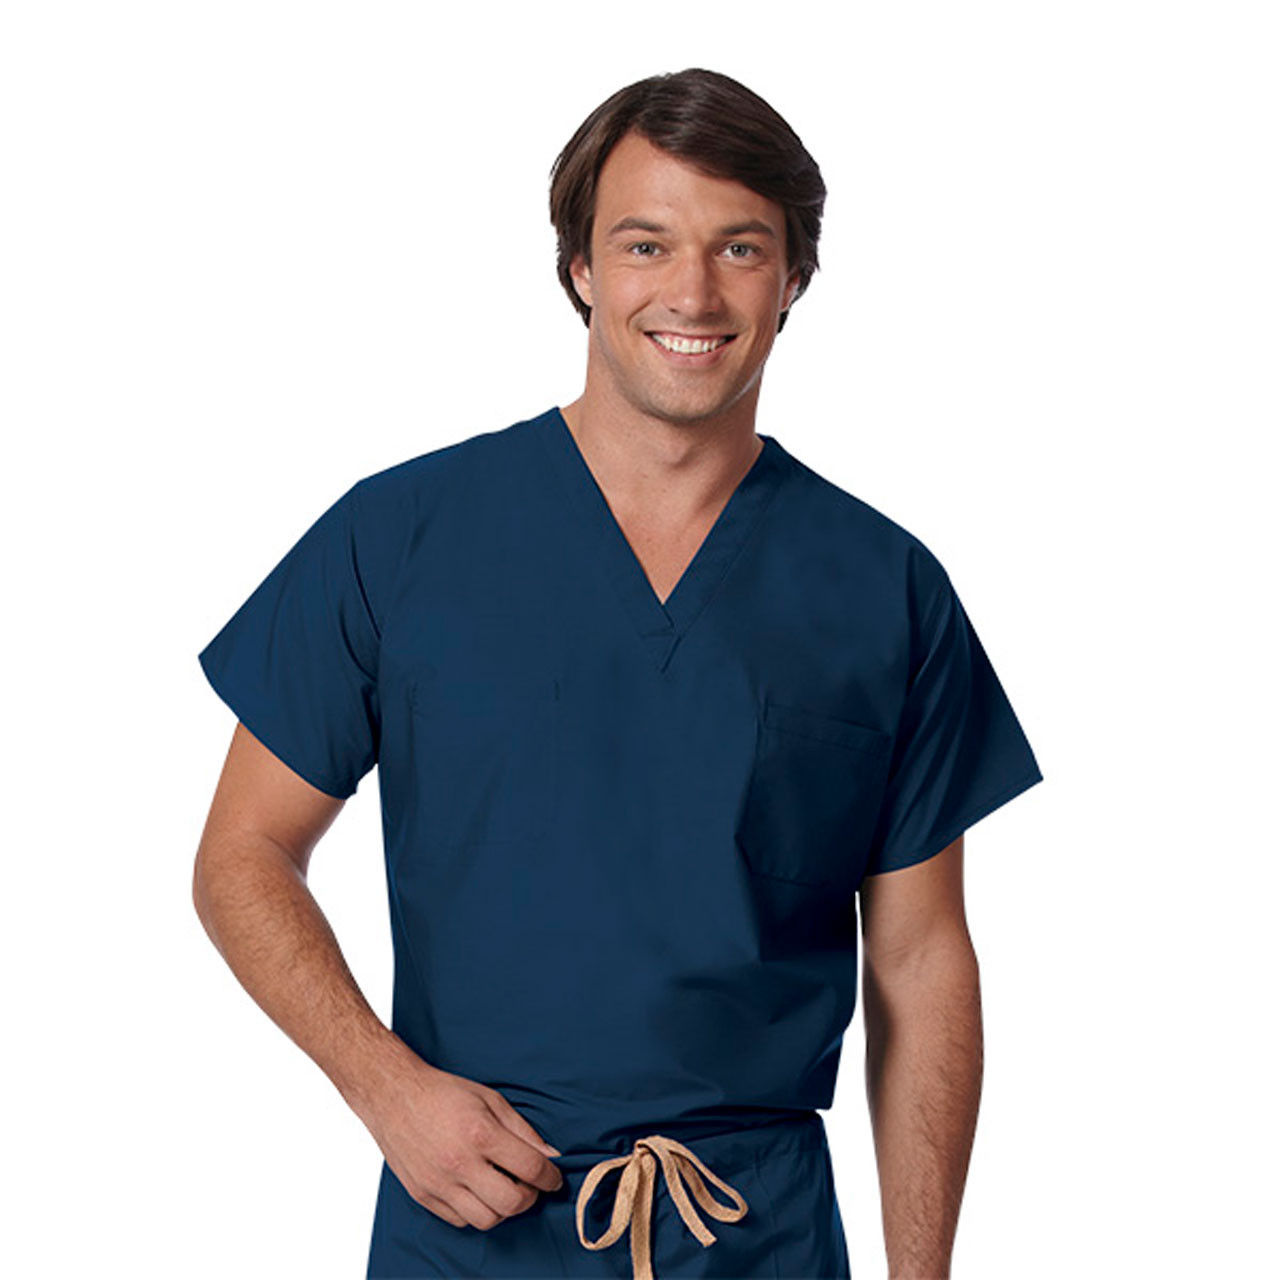 Does the navy surgical scrubs top have a V-neck?